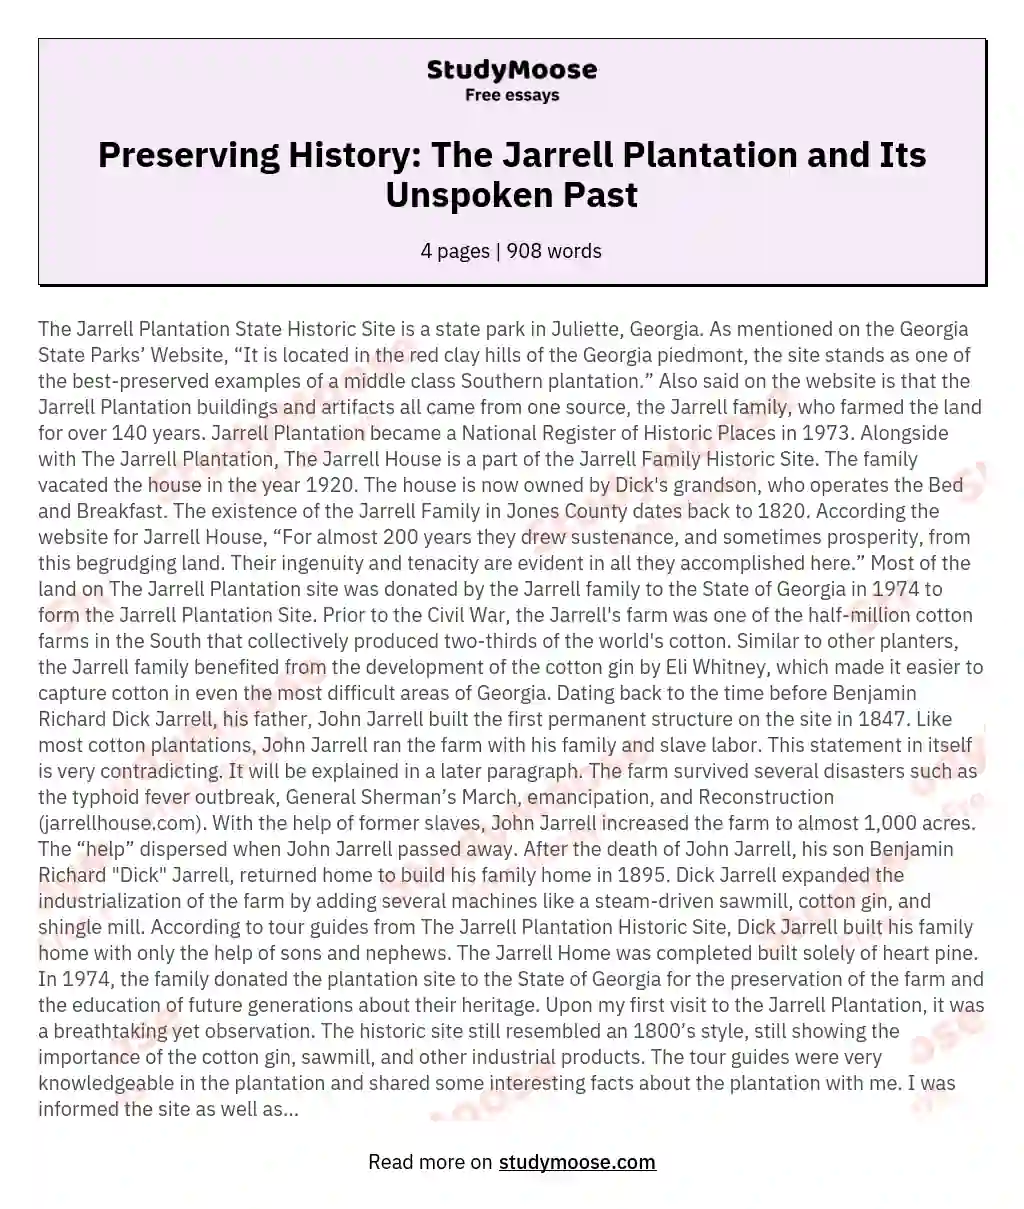 Preserving History: The Jarrell Plantation and Its Unspoken Past essay